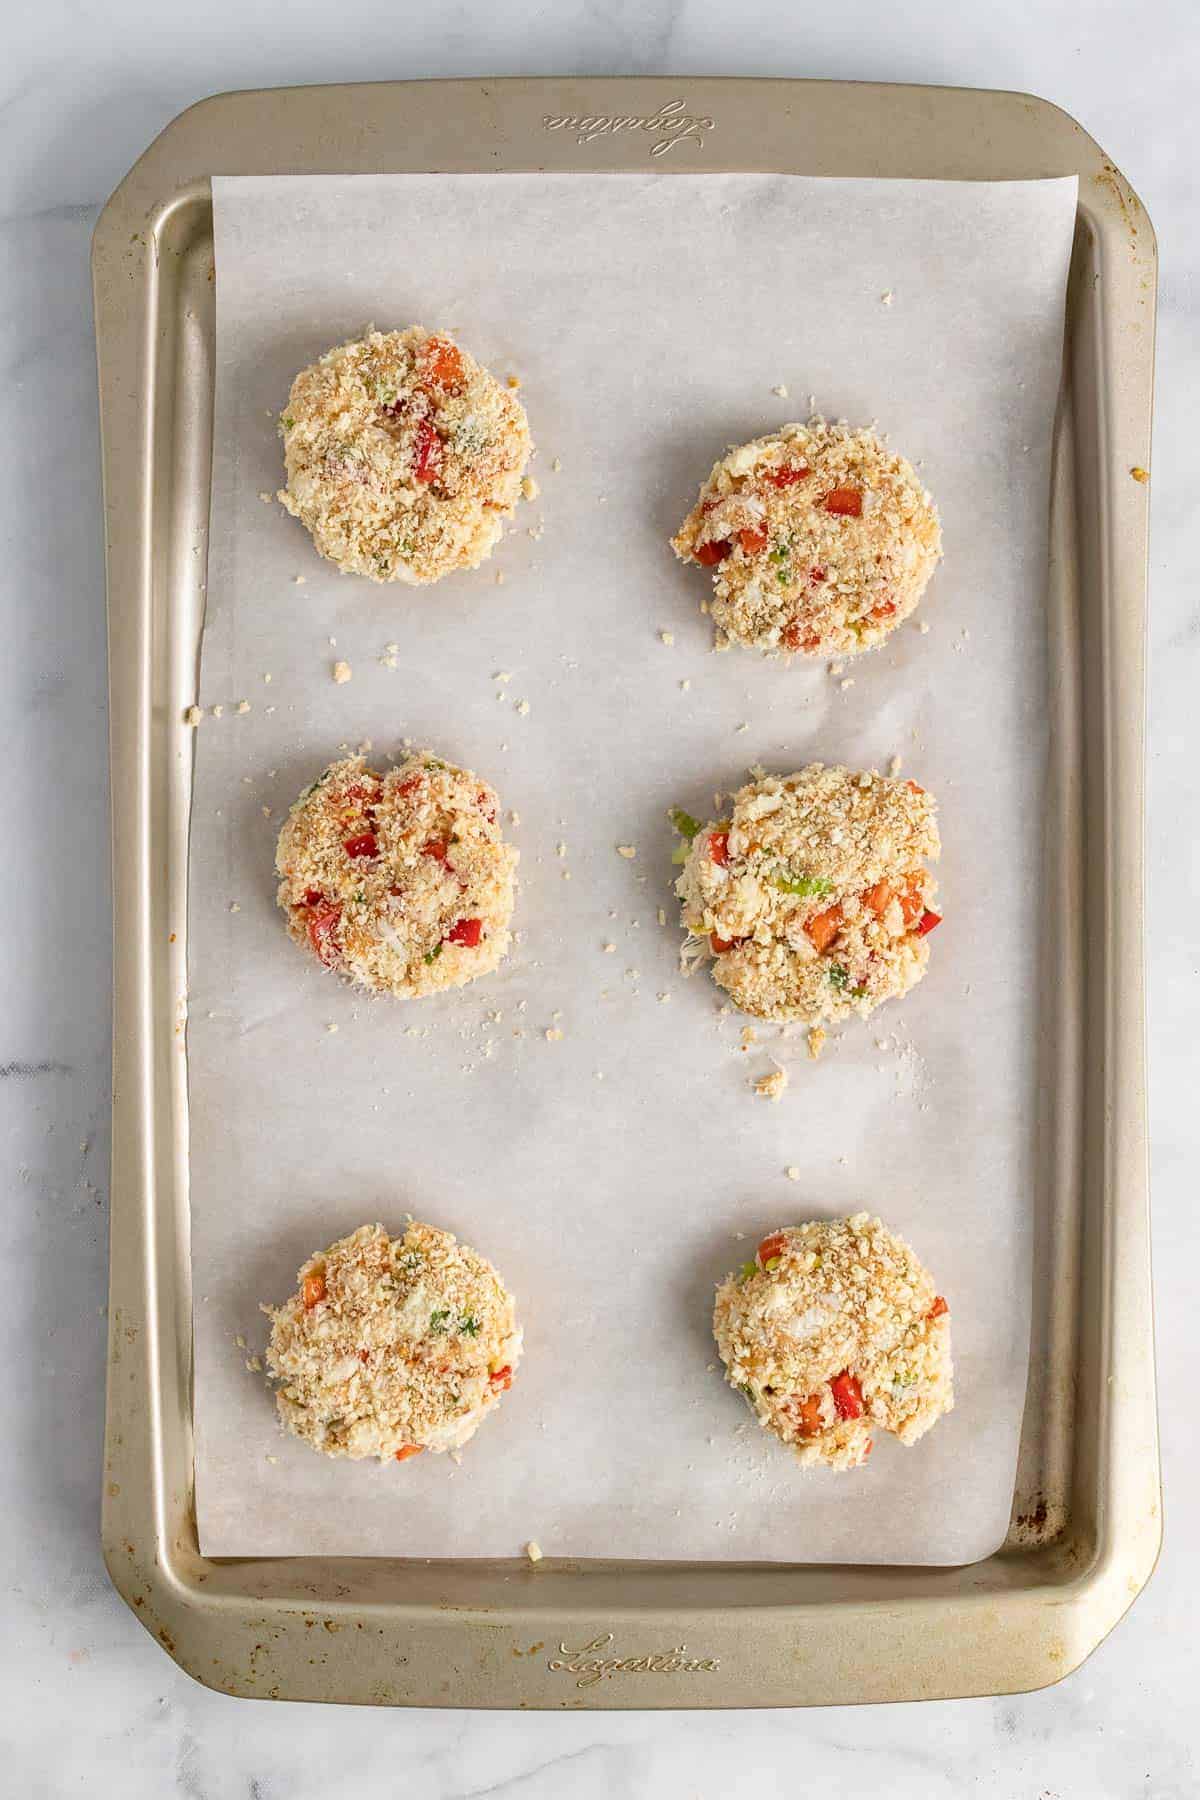 Six crab cakes on a baking tray, ready to go in the oven